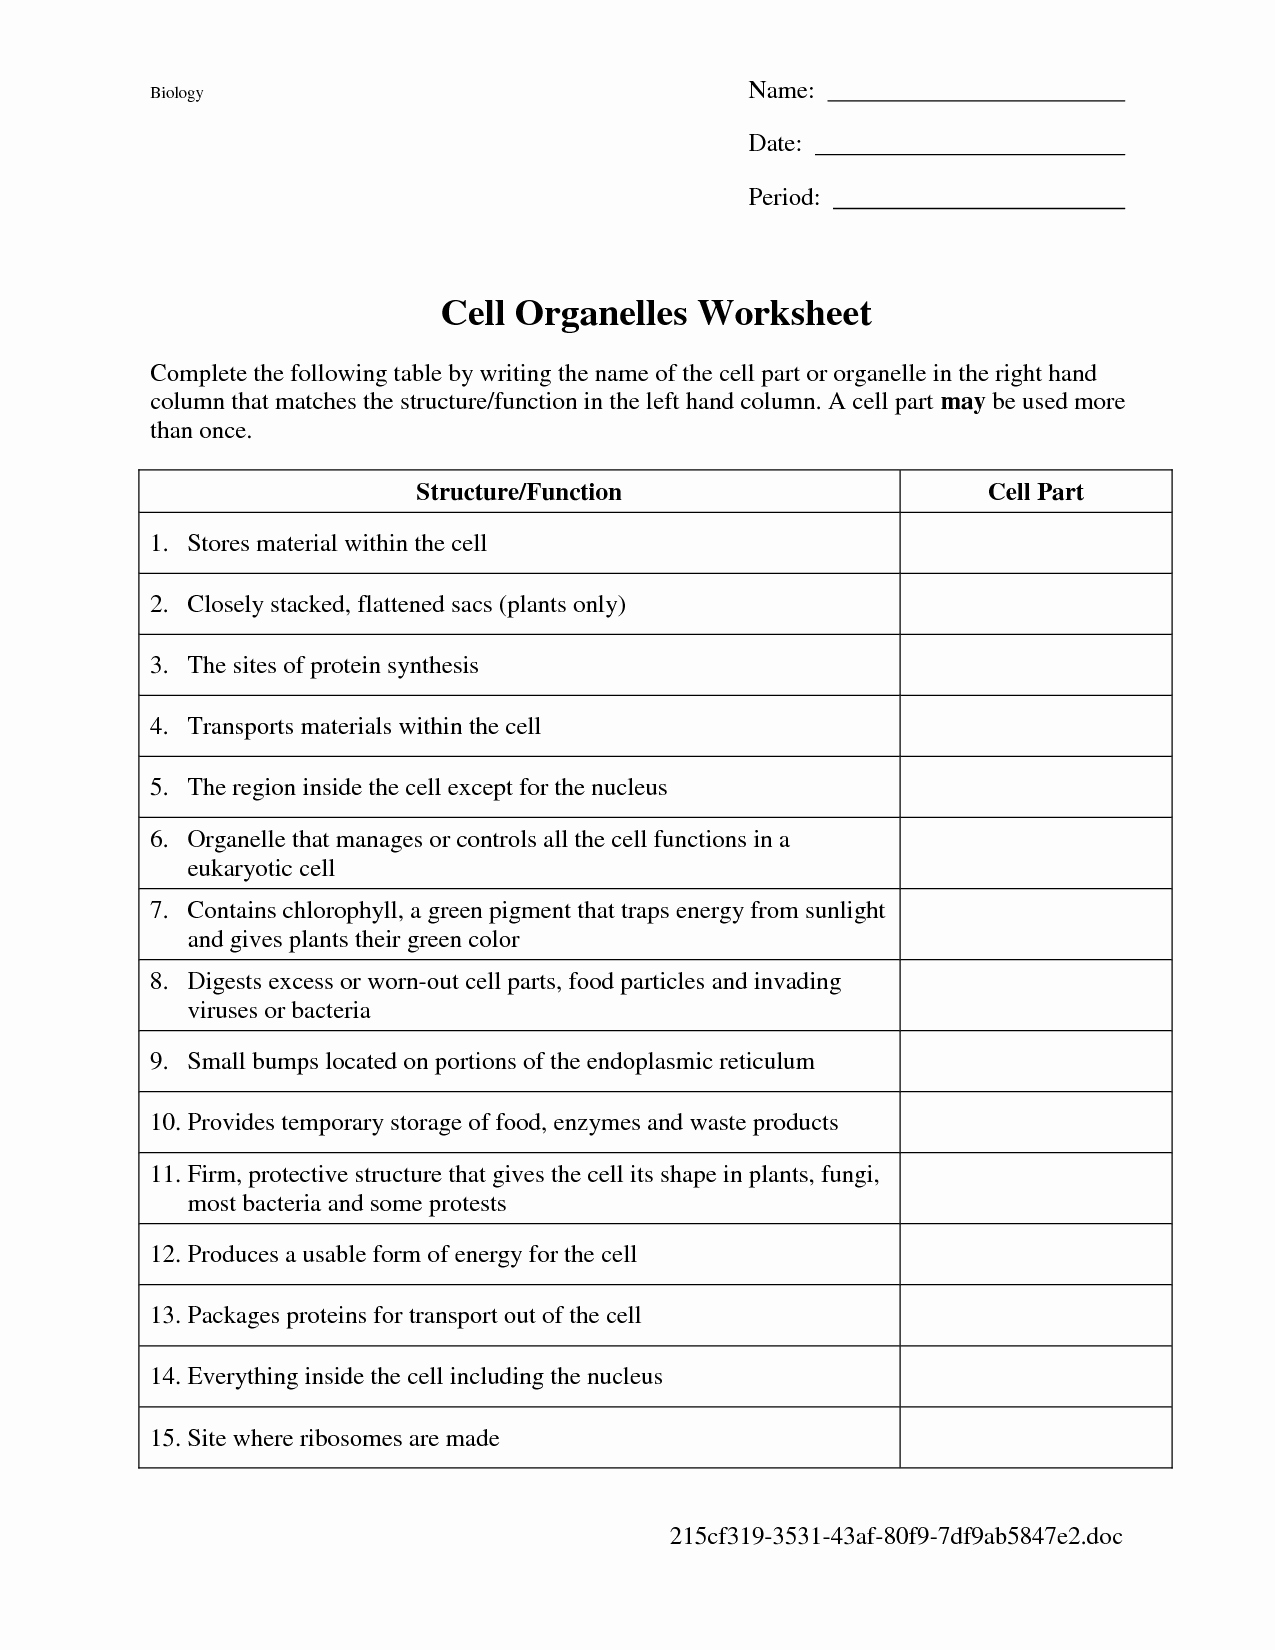 Cells and their organelles Worksheet Luxury 13 Best Of Function organelles Worksheet Cell